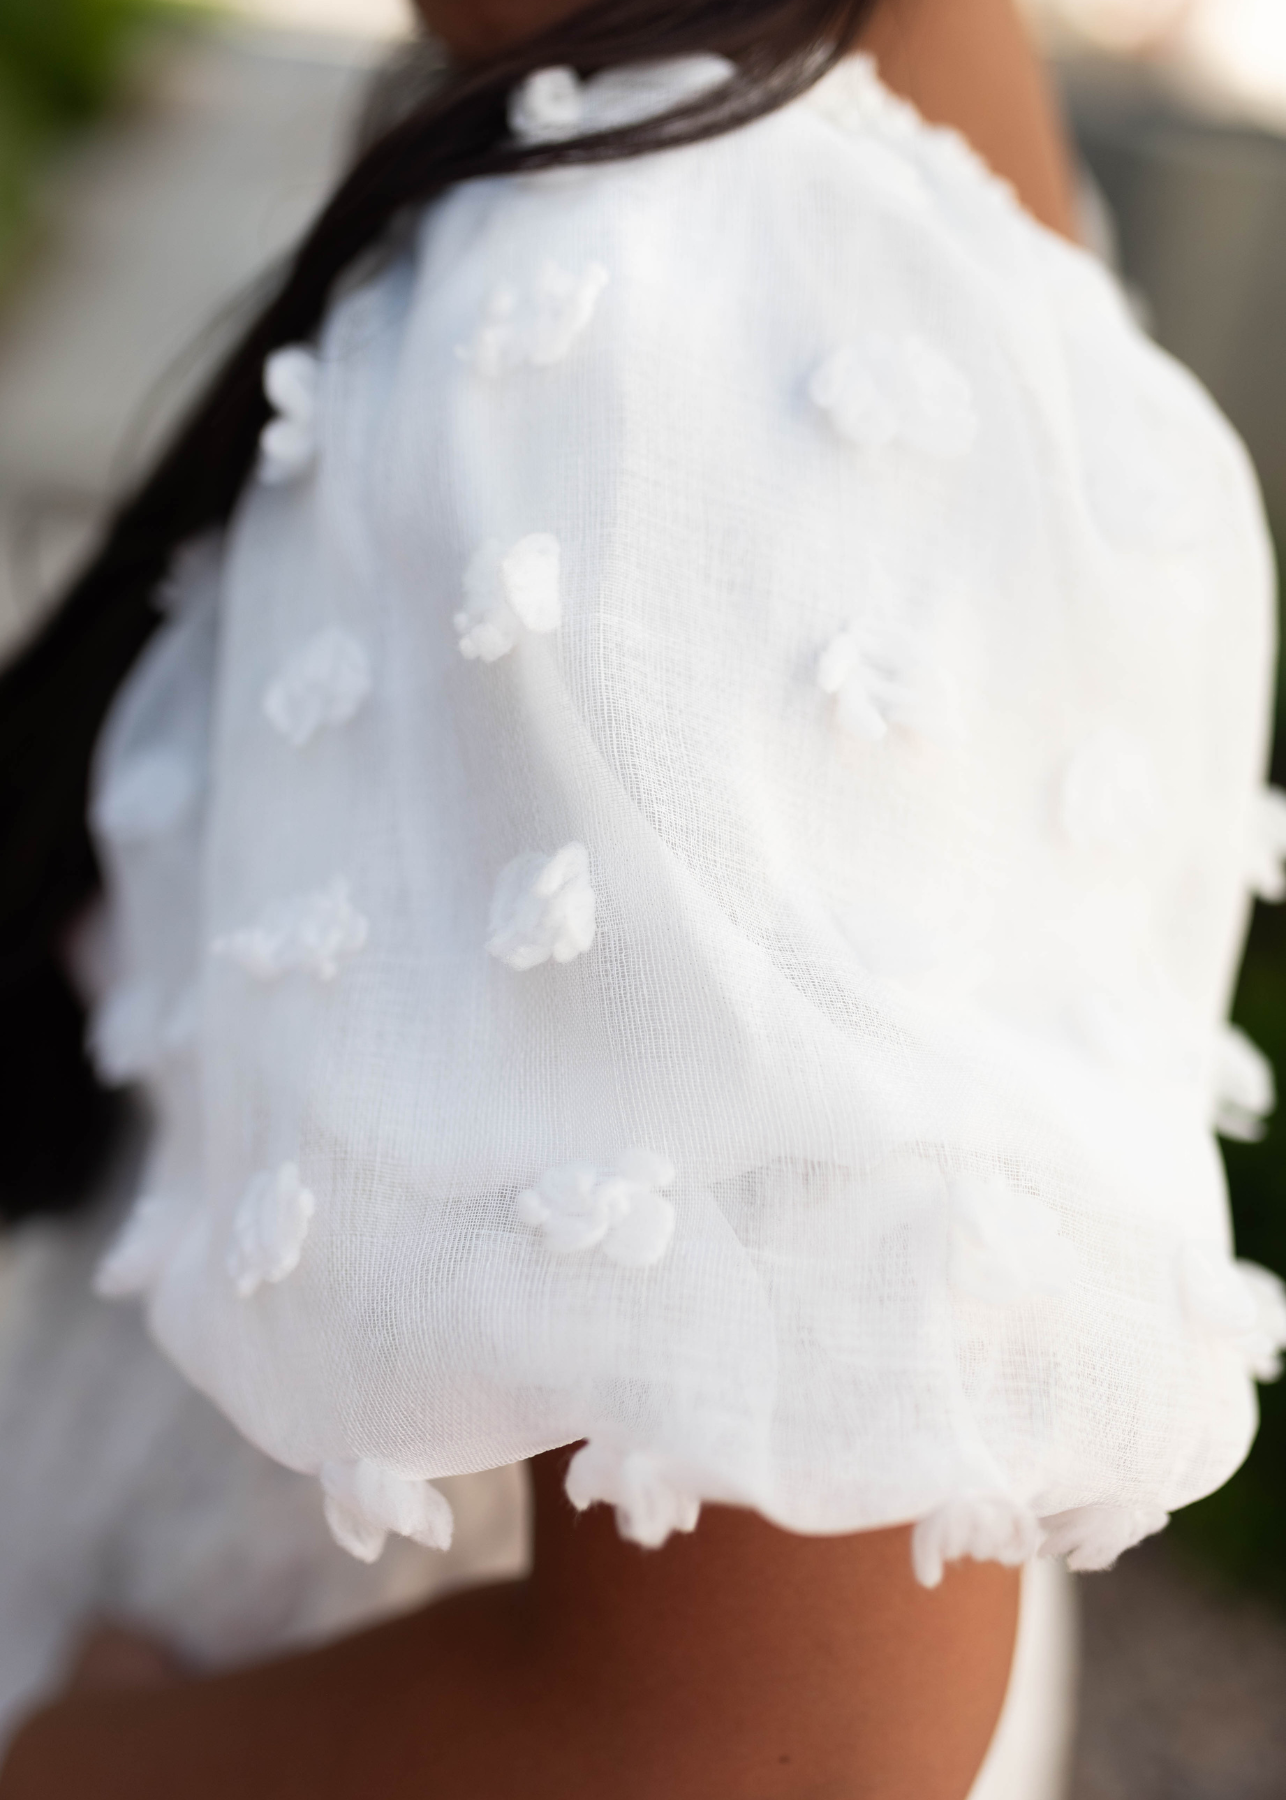 Sleeve of a large white dress